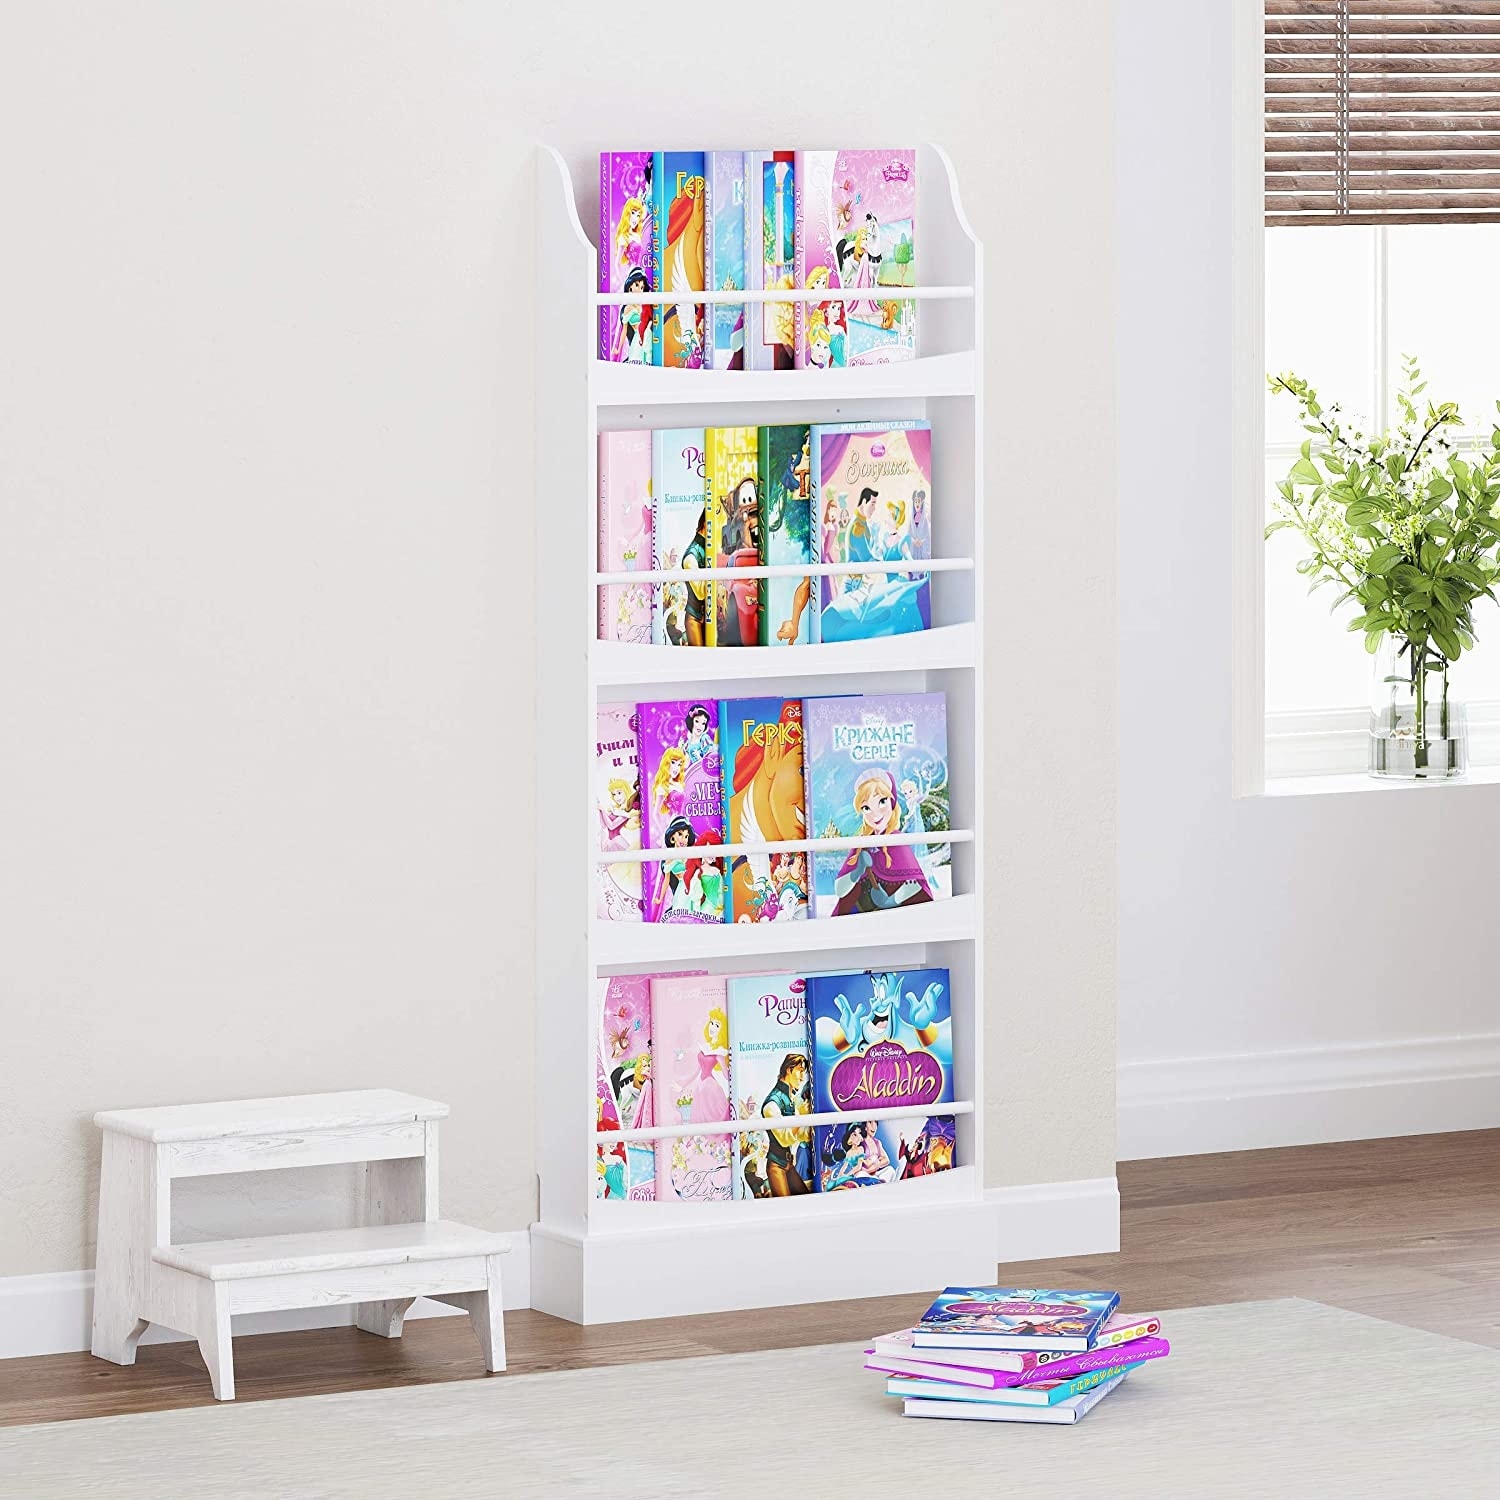 https://ak1.ostkcdn.com/images/products/is/images/direct/6cf44e3f6cba6620cb46d1b3ff09215ebee9d78a/UTEX-Kids-Bookshelf%2CChildren%27s-Bookcases-and-Storage%2C-Kids-Bookcase-Rack-Wall-for-Bedroom%2CStudy-Living-Room%2CWhite.jpg